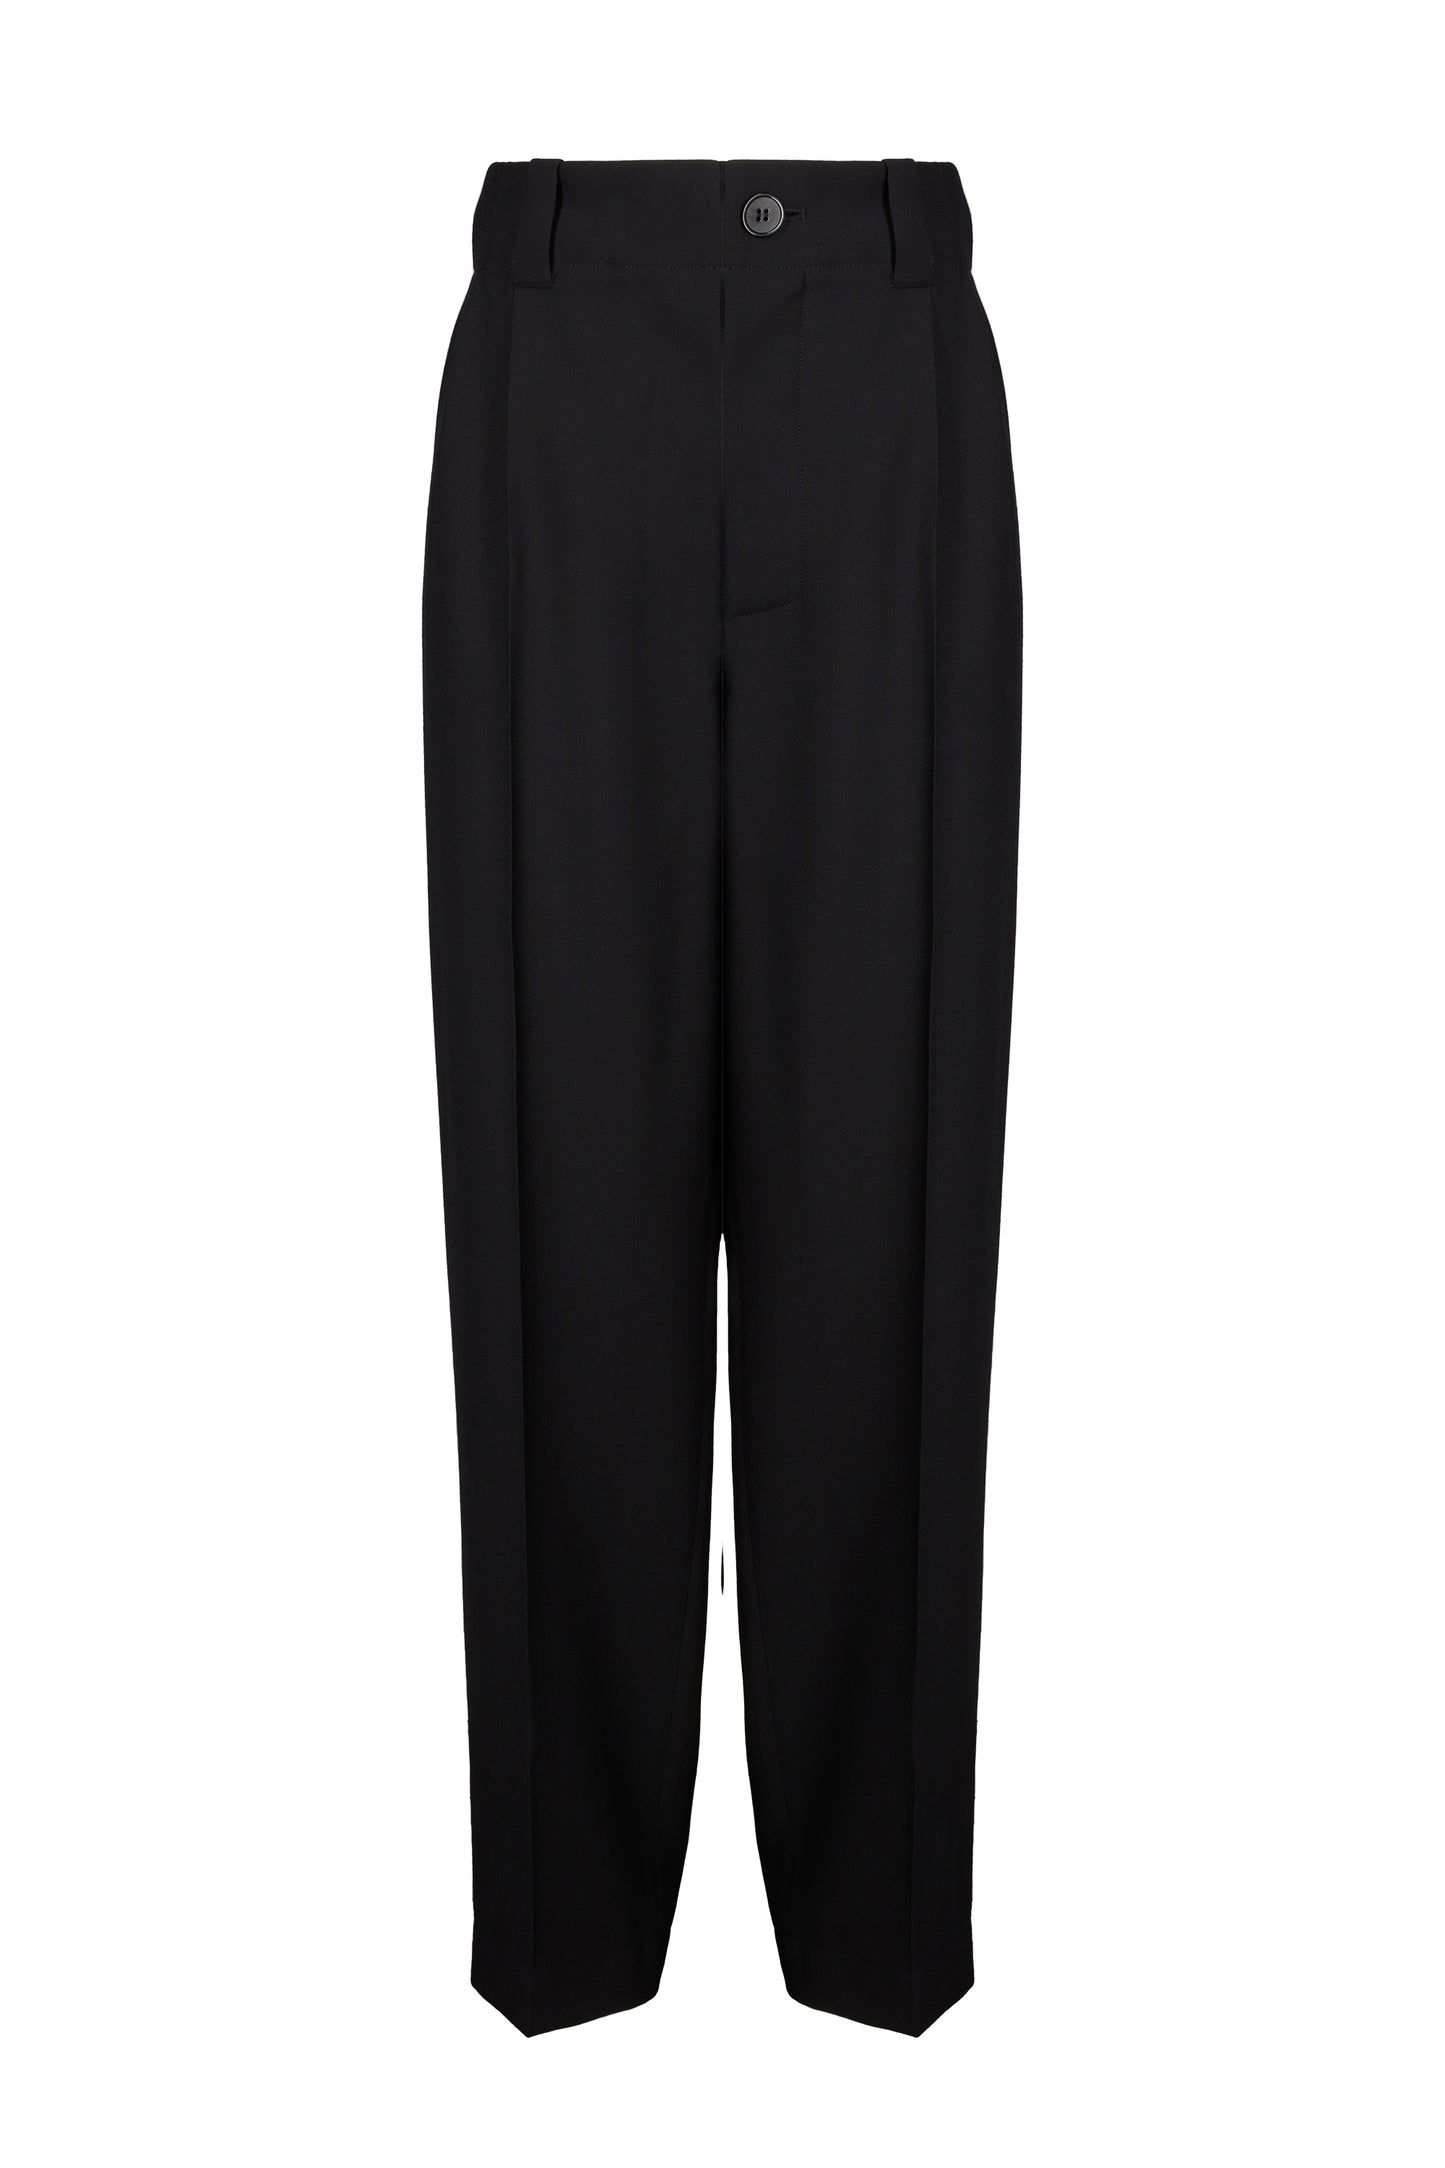 Relaxed Pleat Pants